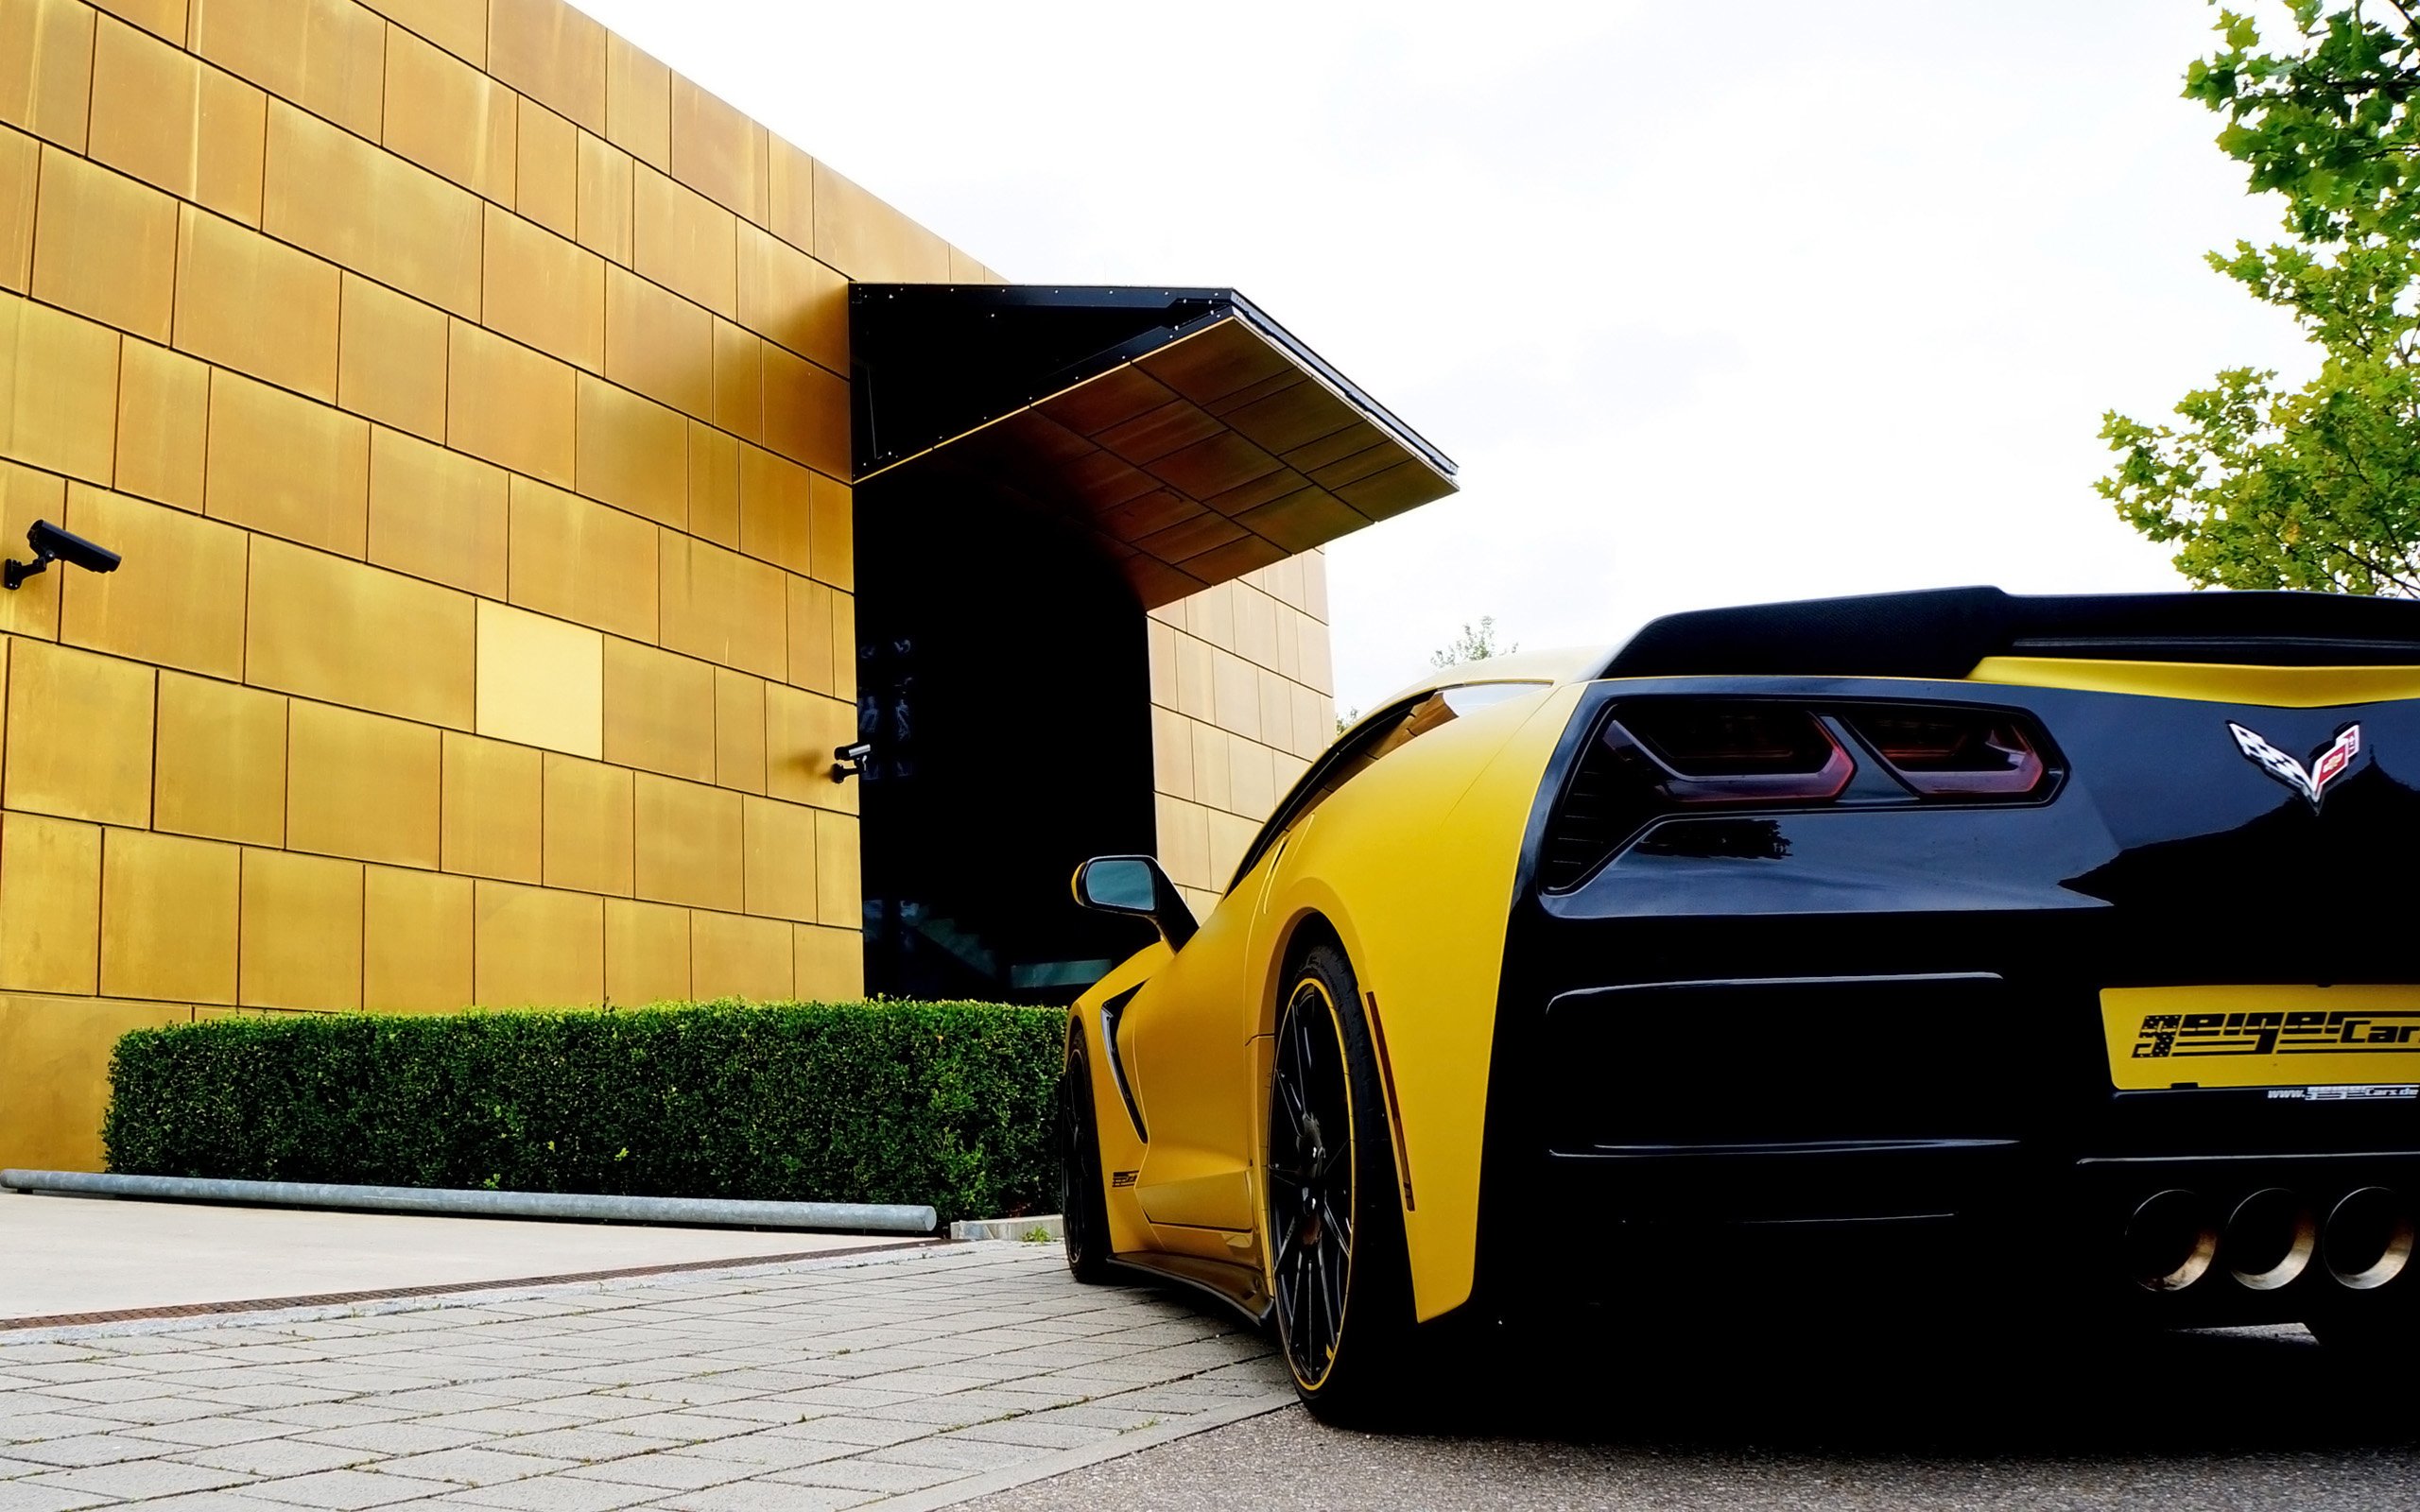 2014, Geigercars, Chevrolet, Corvette, C 7, Stingray, Muscle, Supercar, Tuning Wallpaper